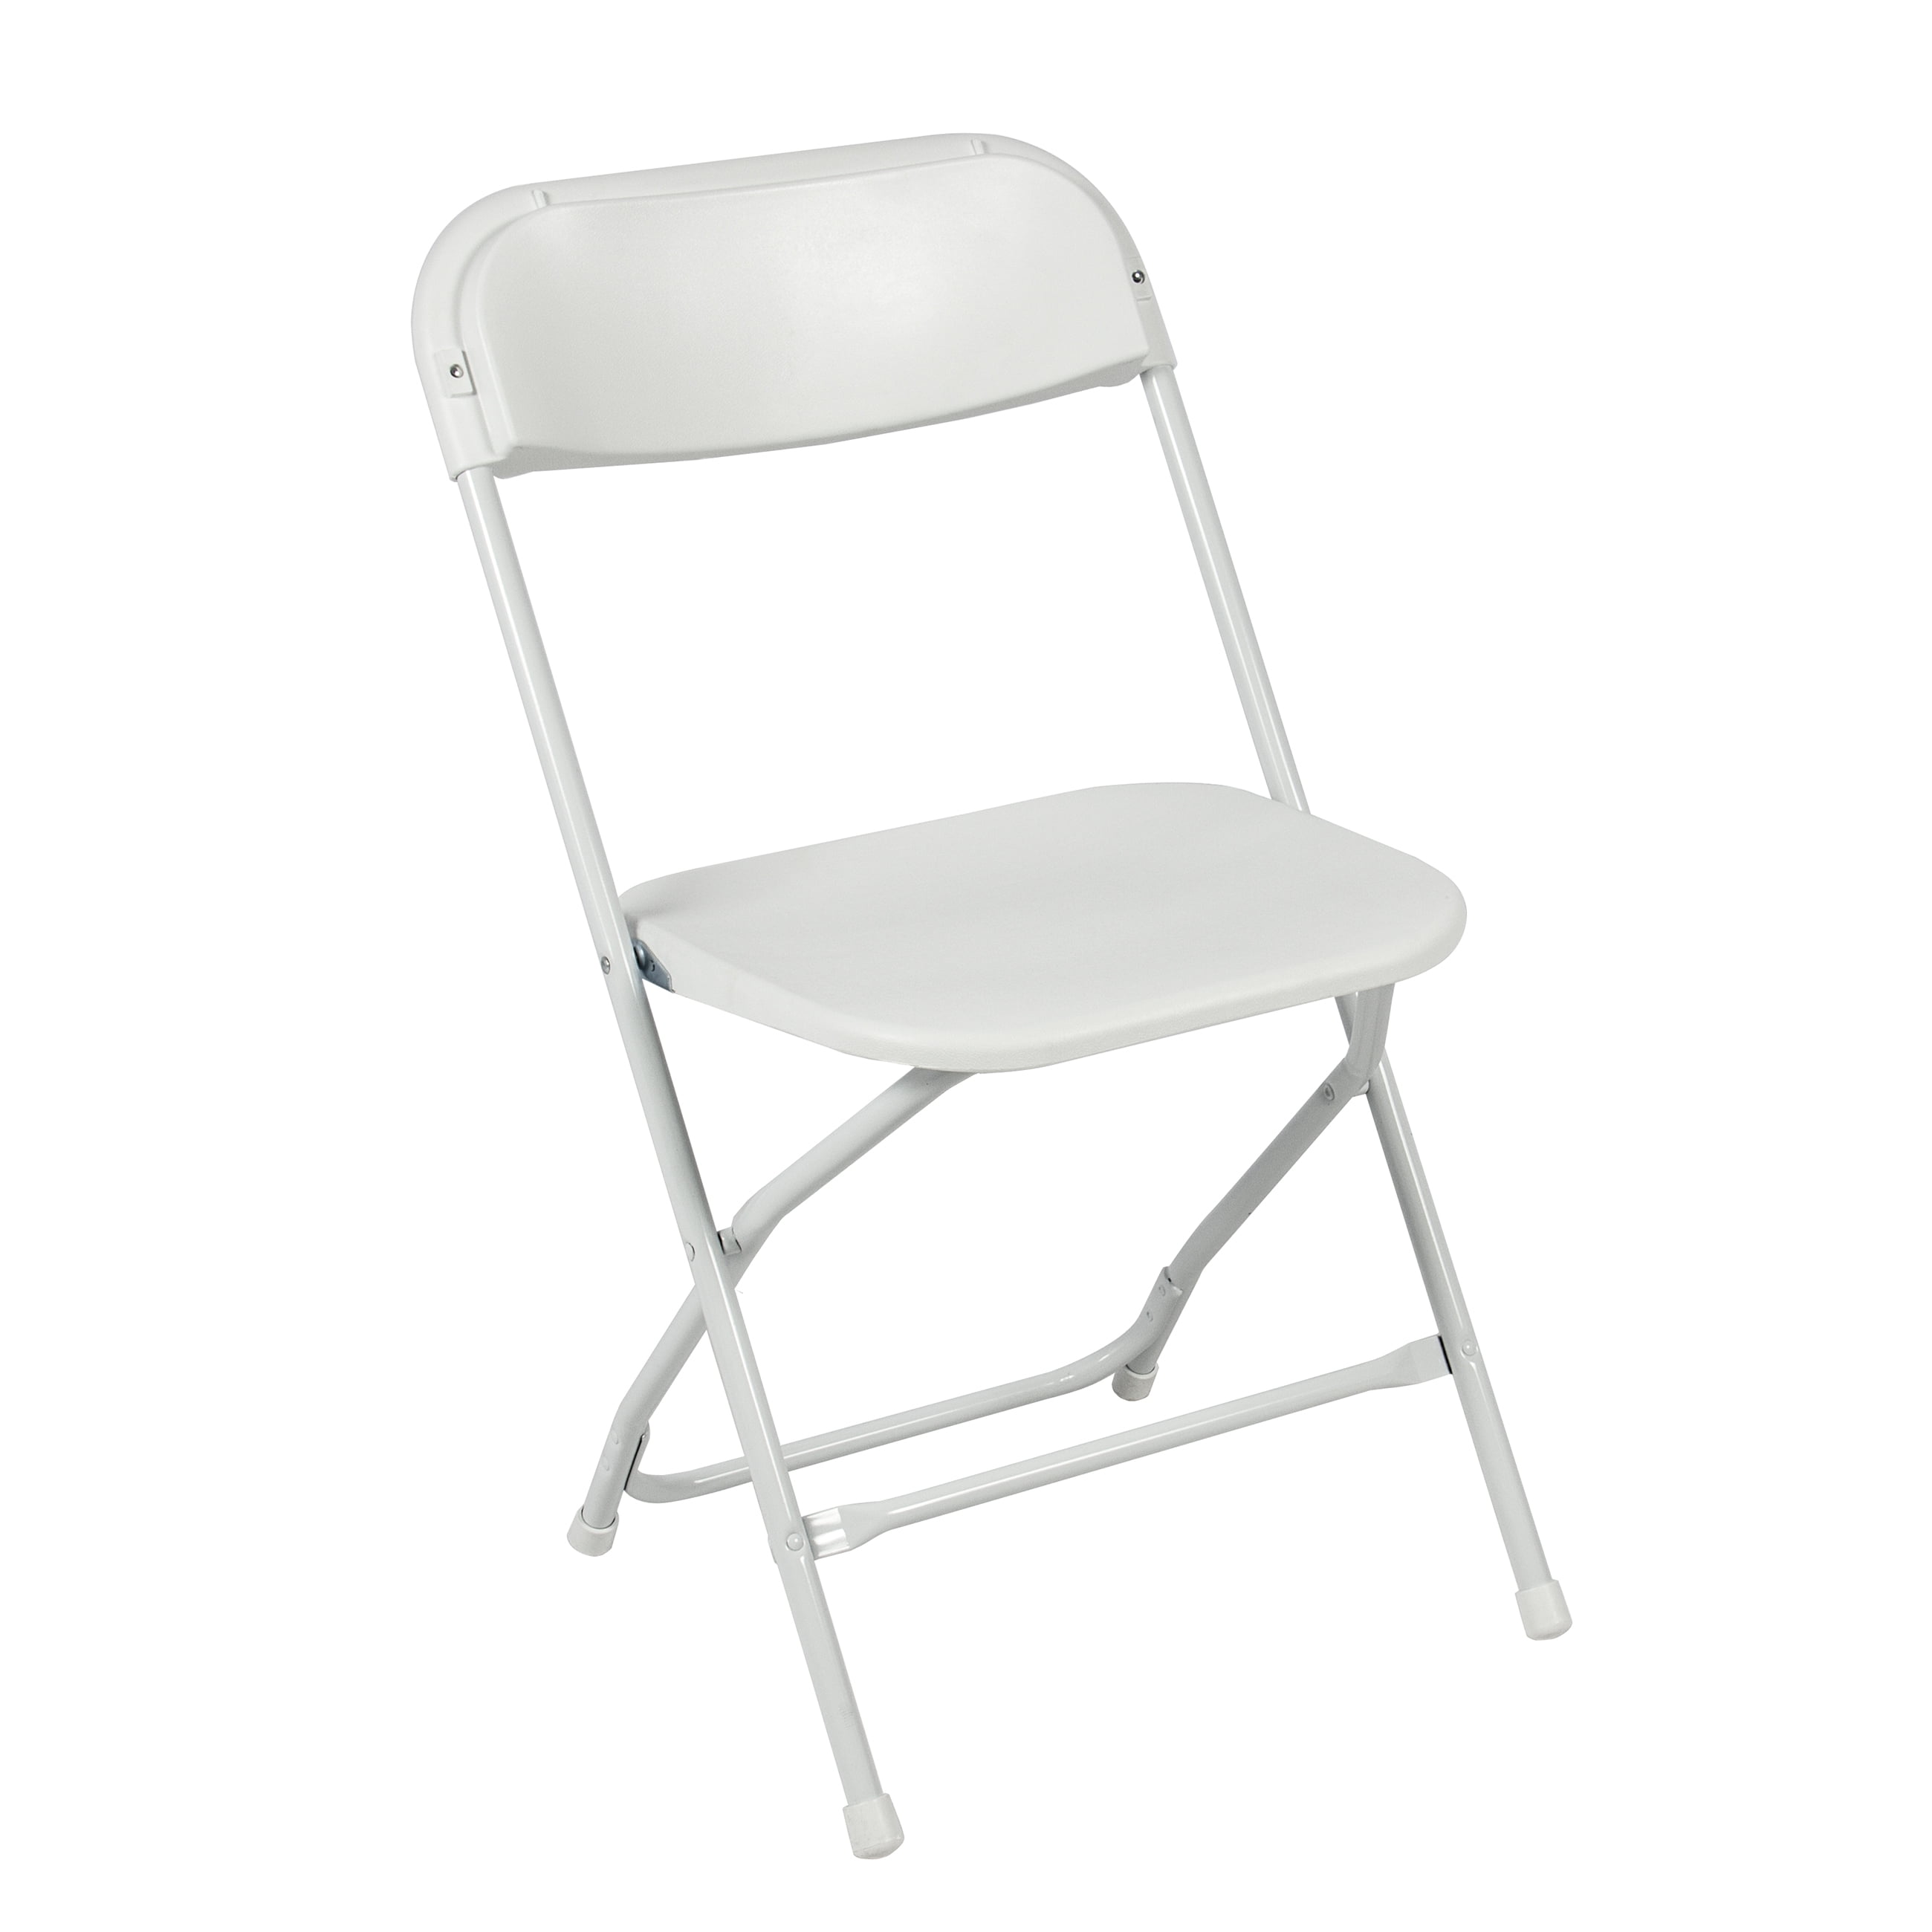 5 X Commercial White Plastic Folding Chairs Stackable Wedding Party Event Chair 